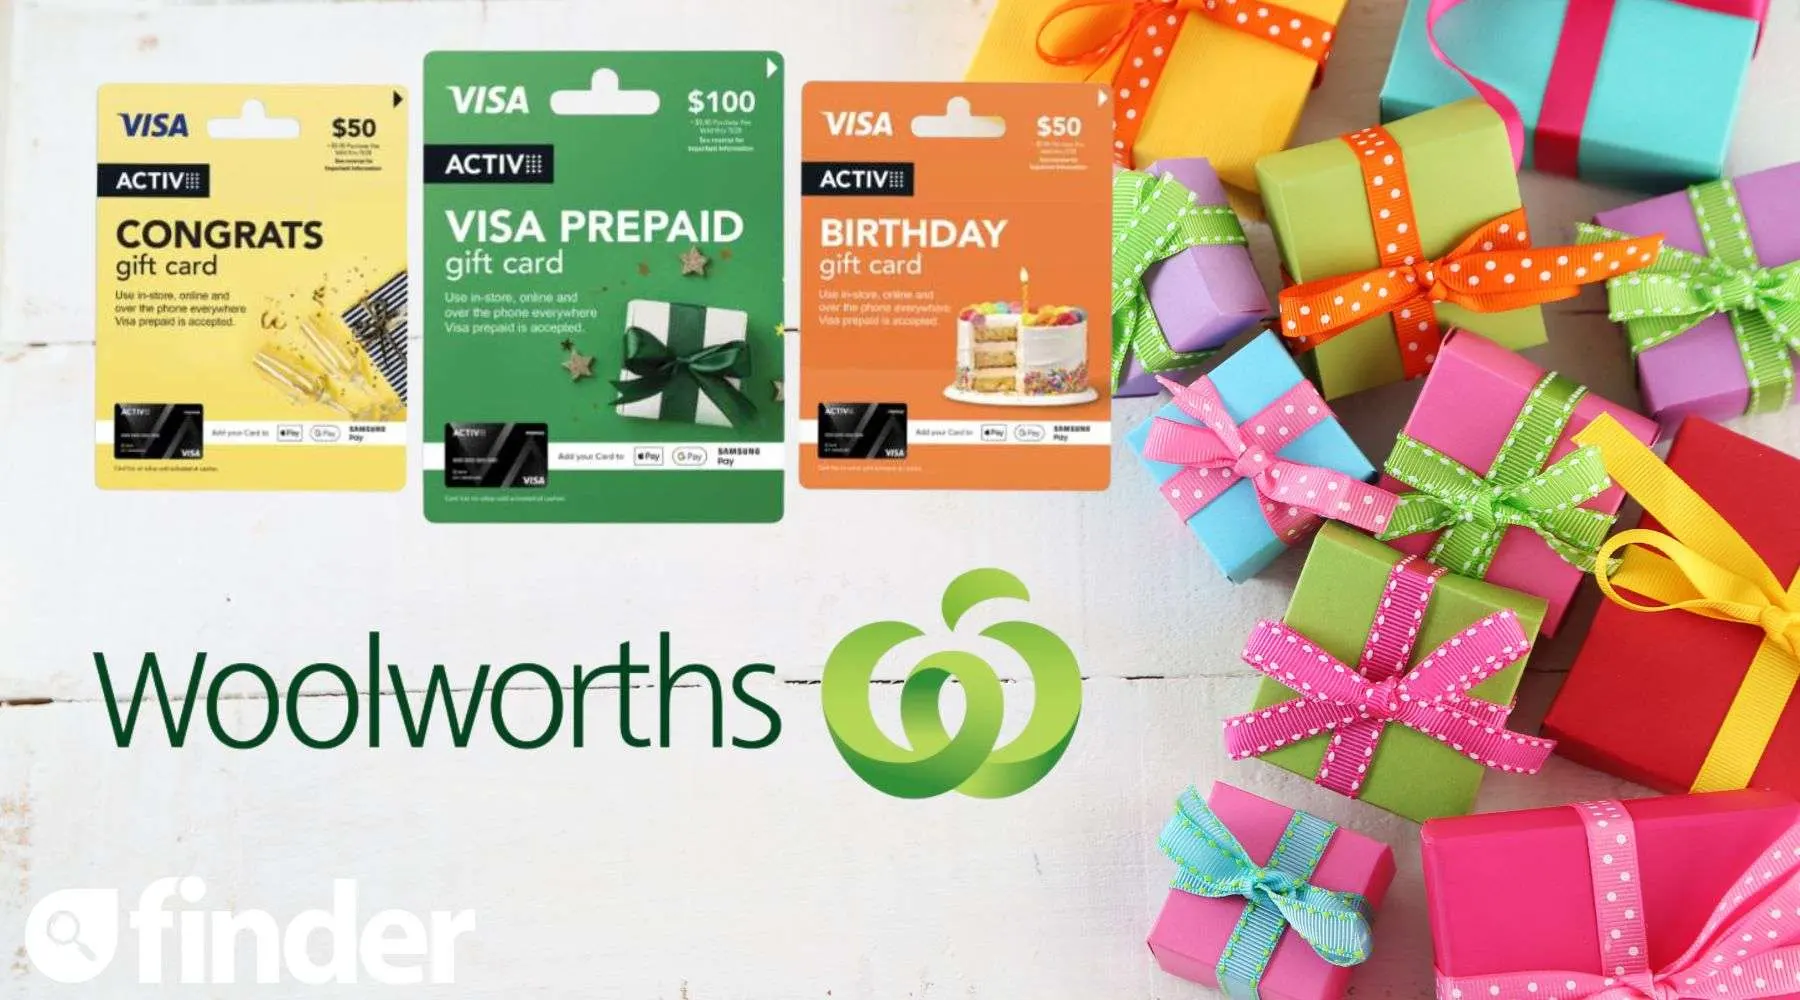 WOOLWORTHS WISH GIFT CARD - $50 (14000 points required)